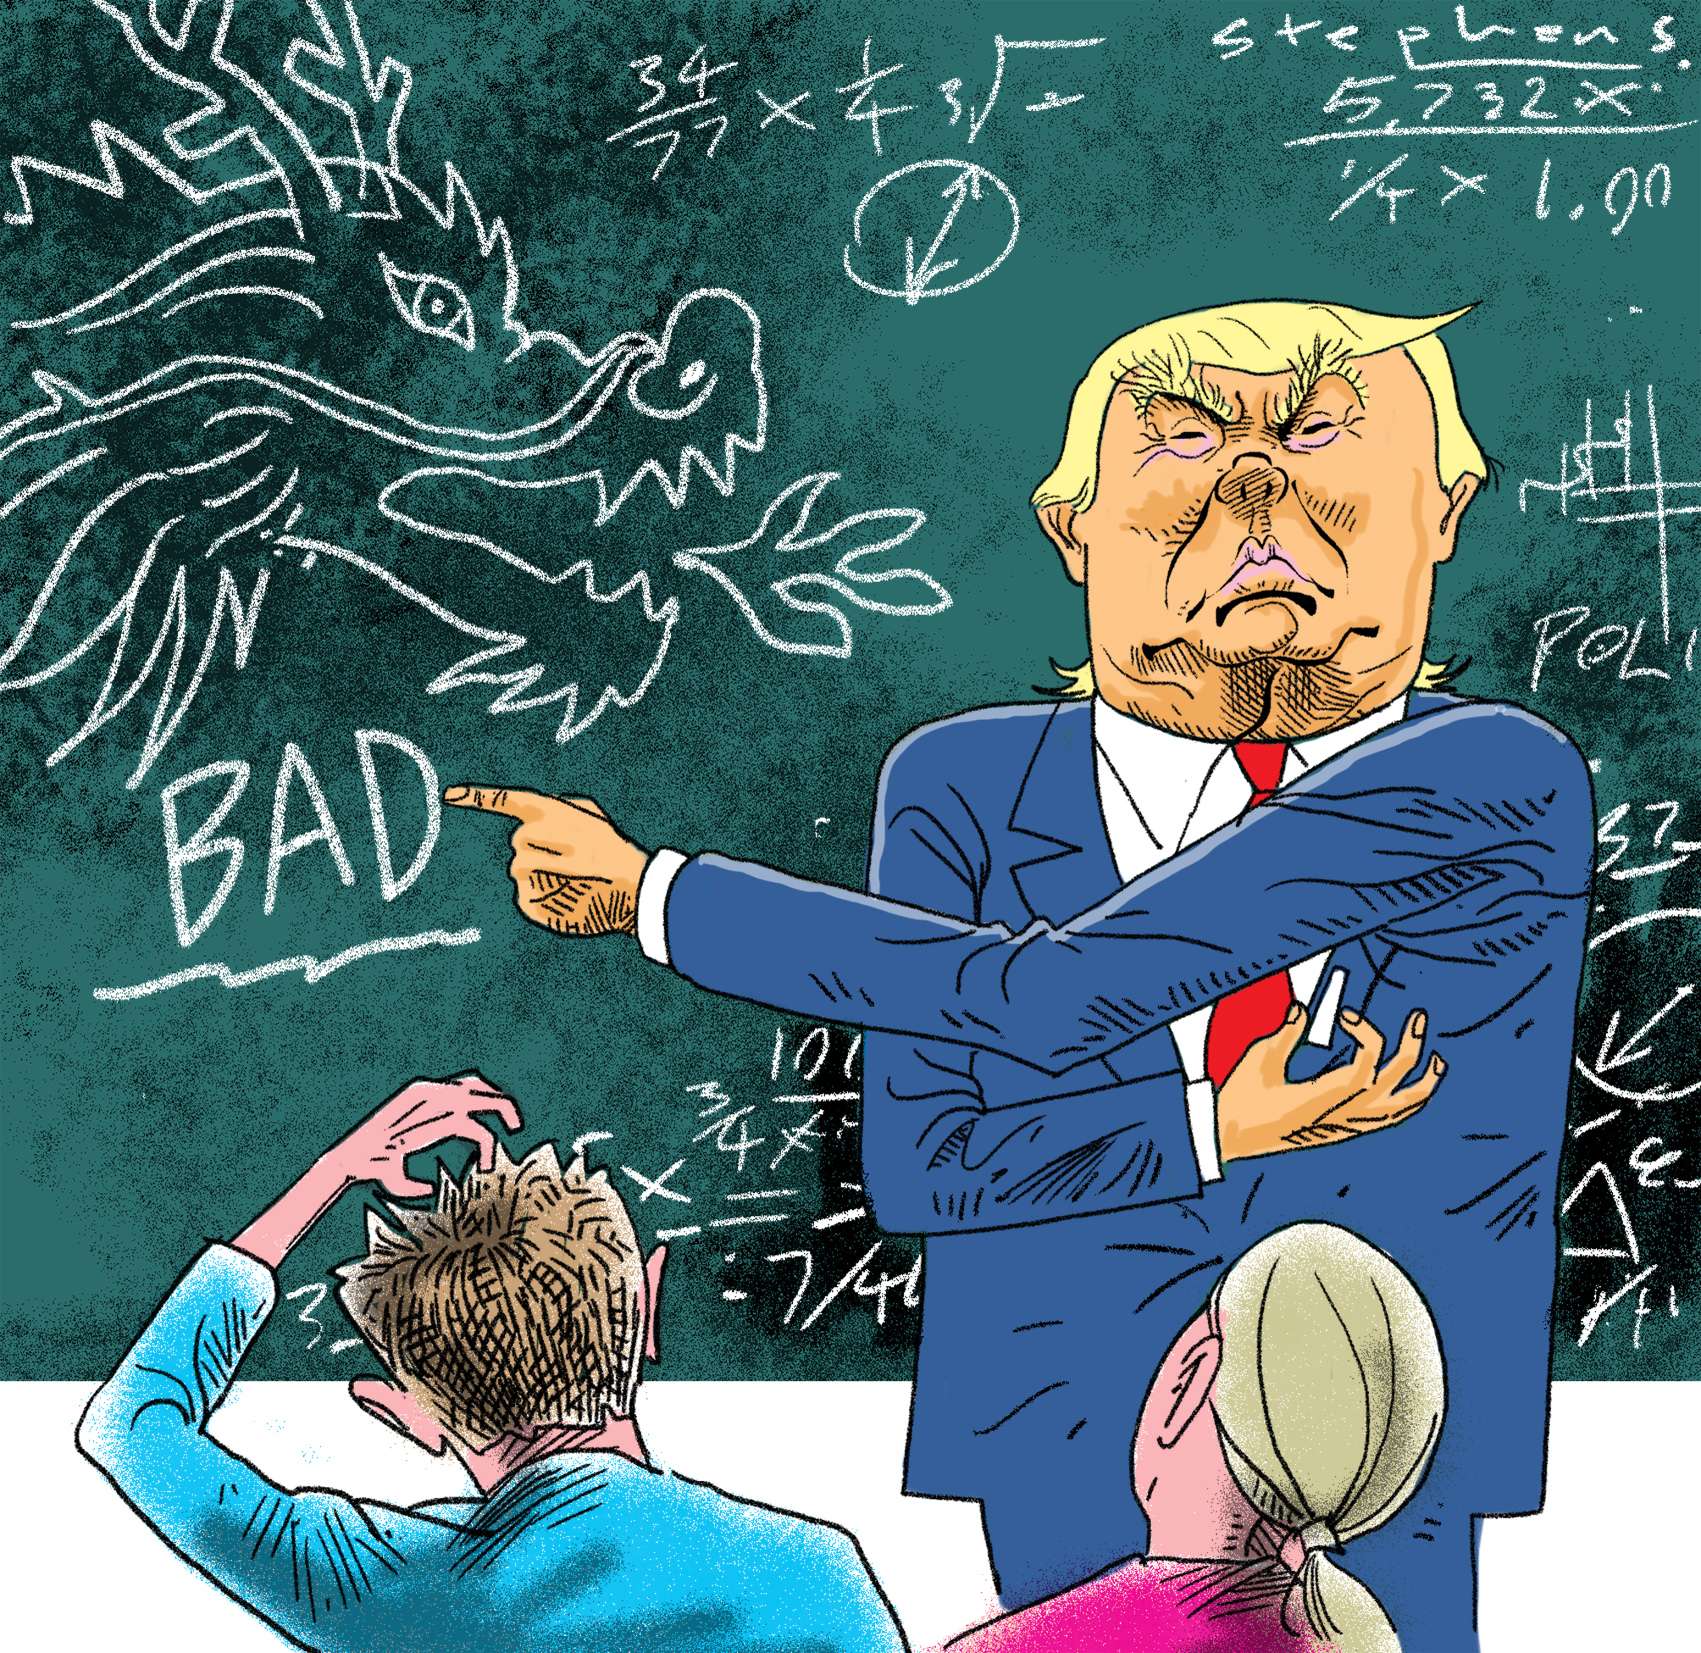 Gerard A. Postiglione says Trump’s policies are already causing disruptions on campuses in the US, an opportunity competing Chinese universities could seize to get ahead. Overall, however, a deteriorating bilateral relationship will bring more harm than good